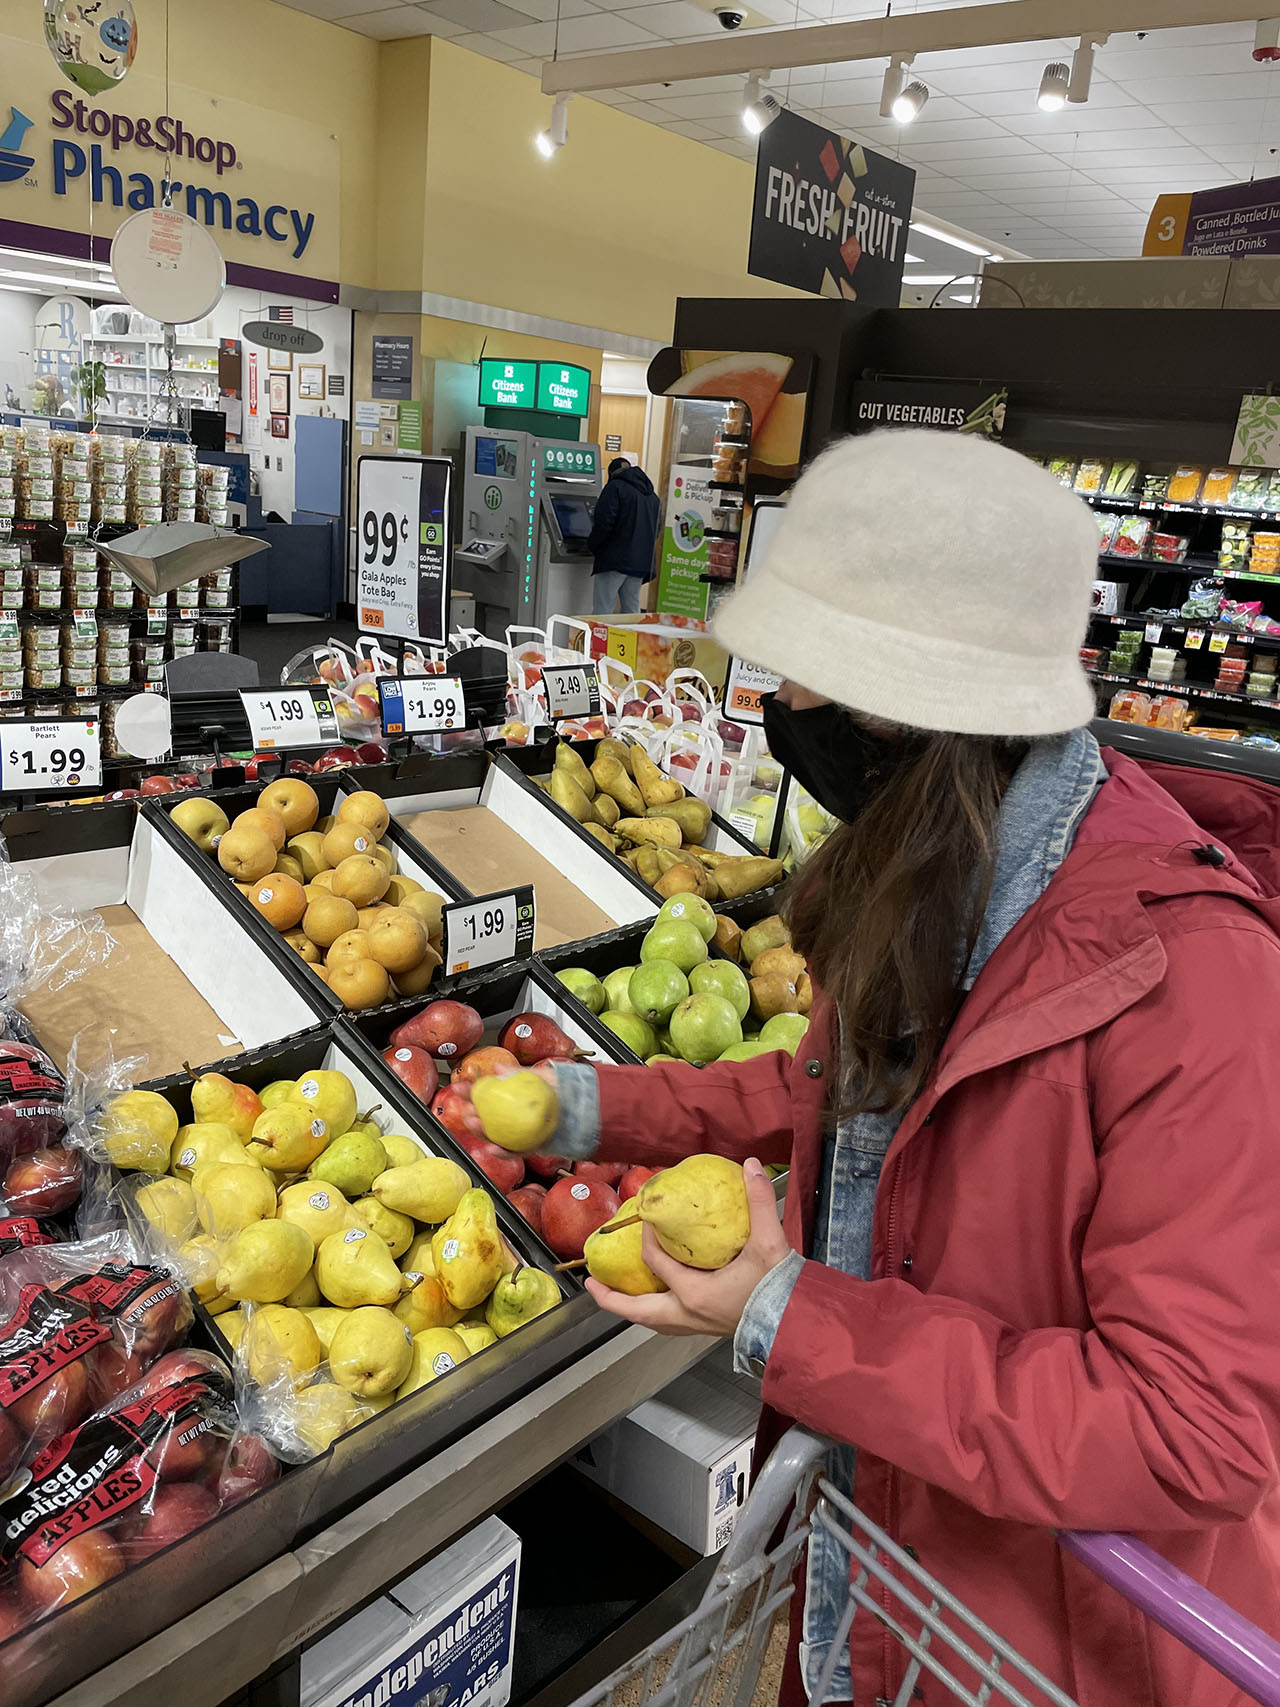 Savanna Nolau, in a bright red coat, grabbing a few yellow pears during a shopping trip with Instacart